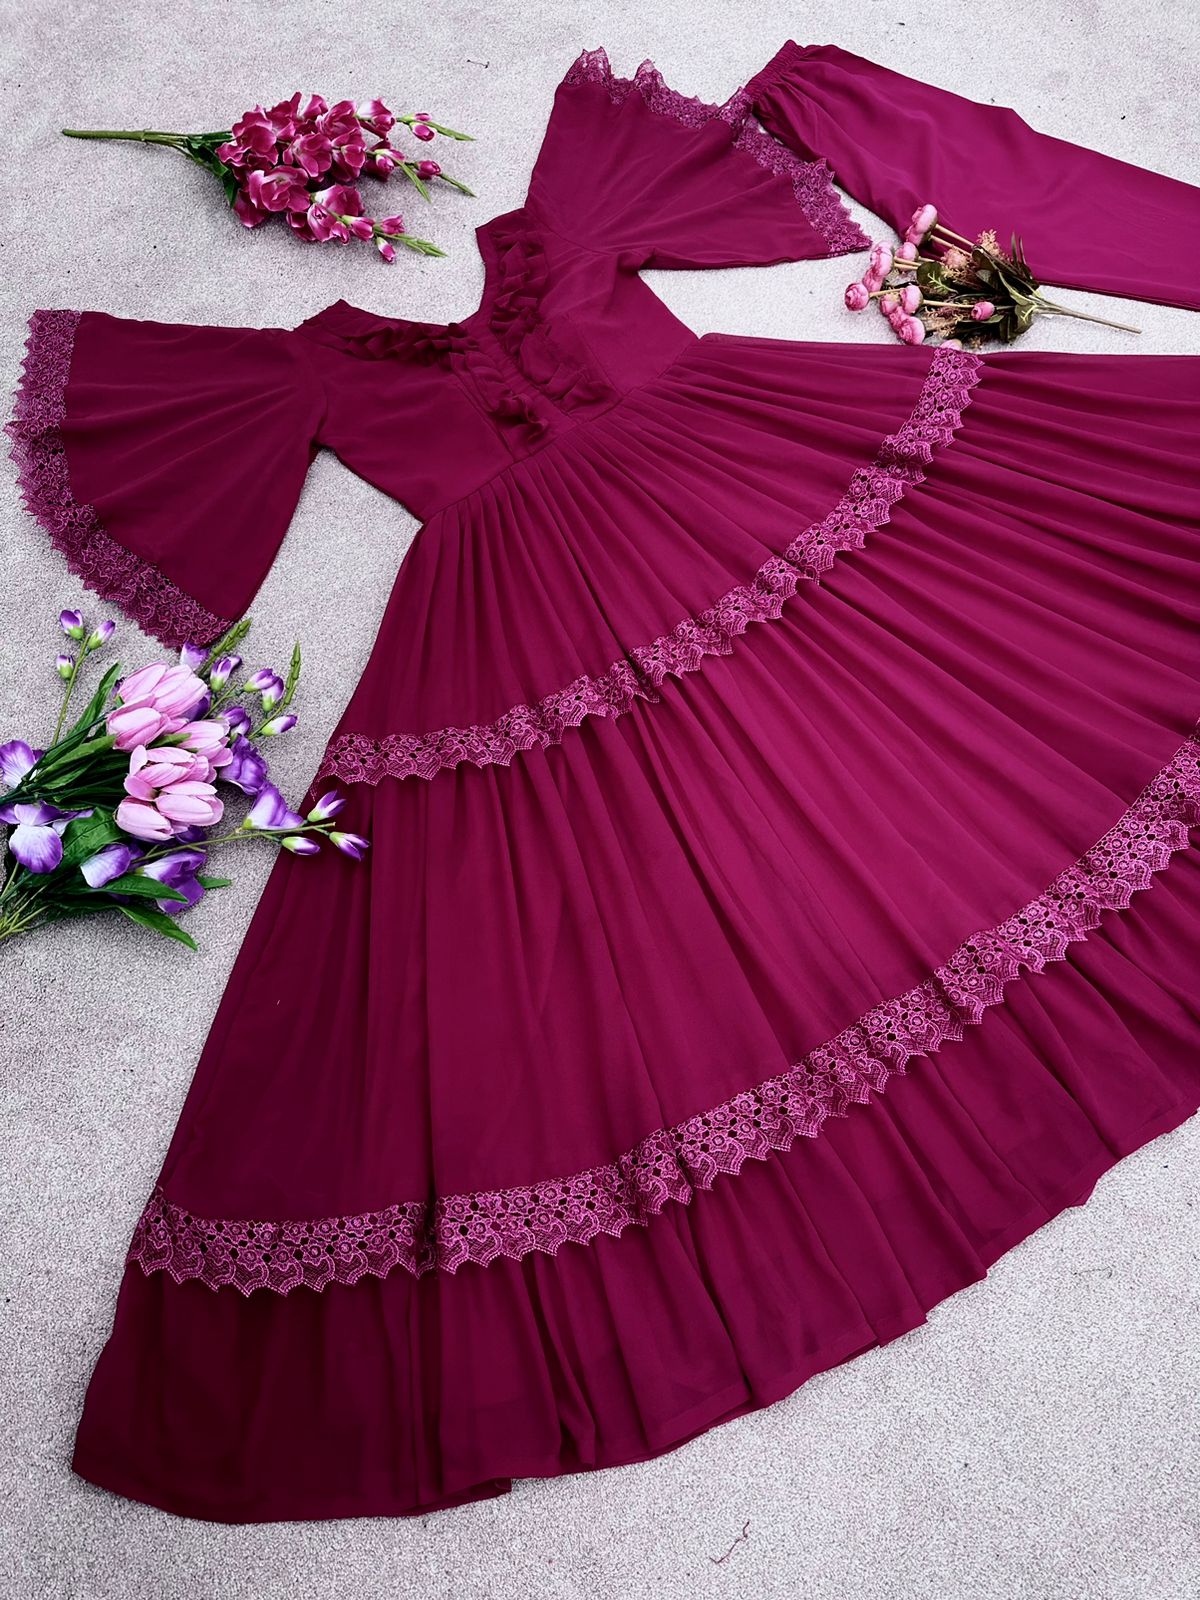 Awesome Wine Color Fancy Sleeve Gown